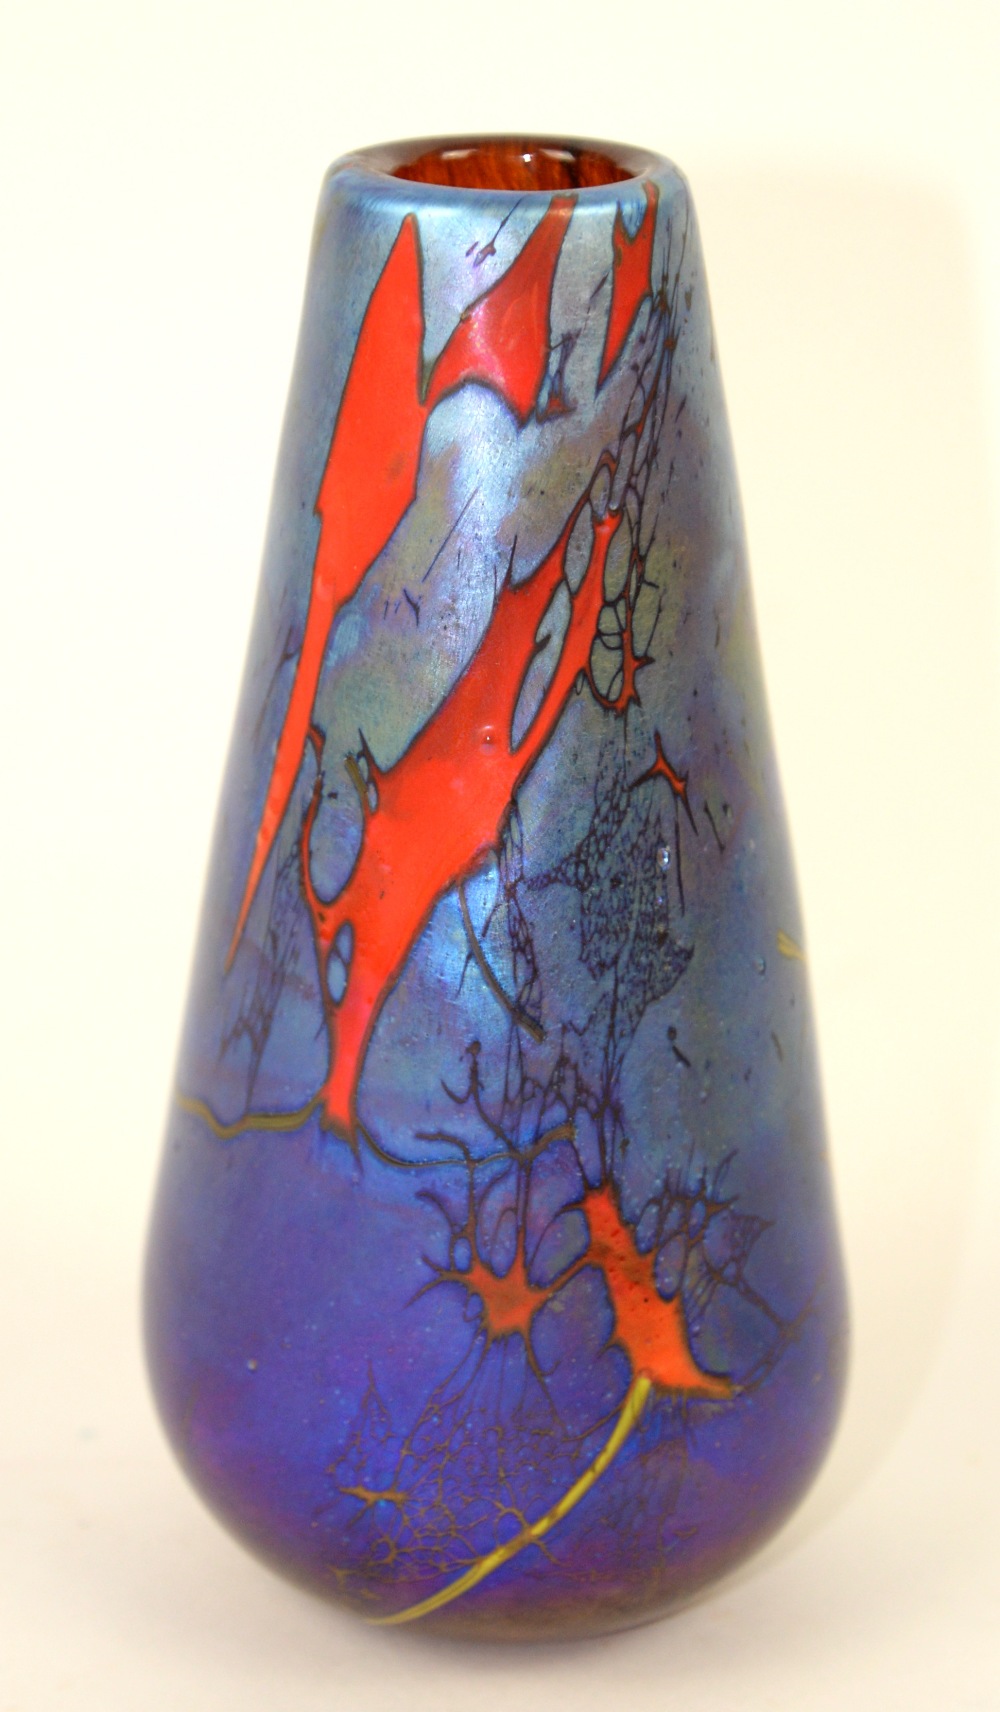 Siddy Langley Glass - Tapering bud vase with iridescent purple ground highlighted in red and gold,